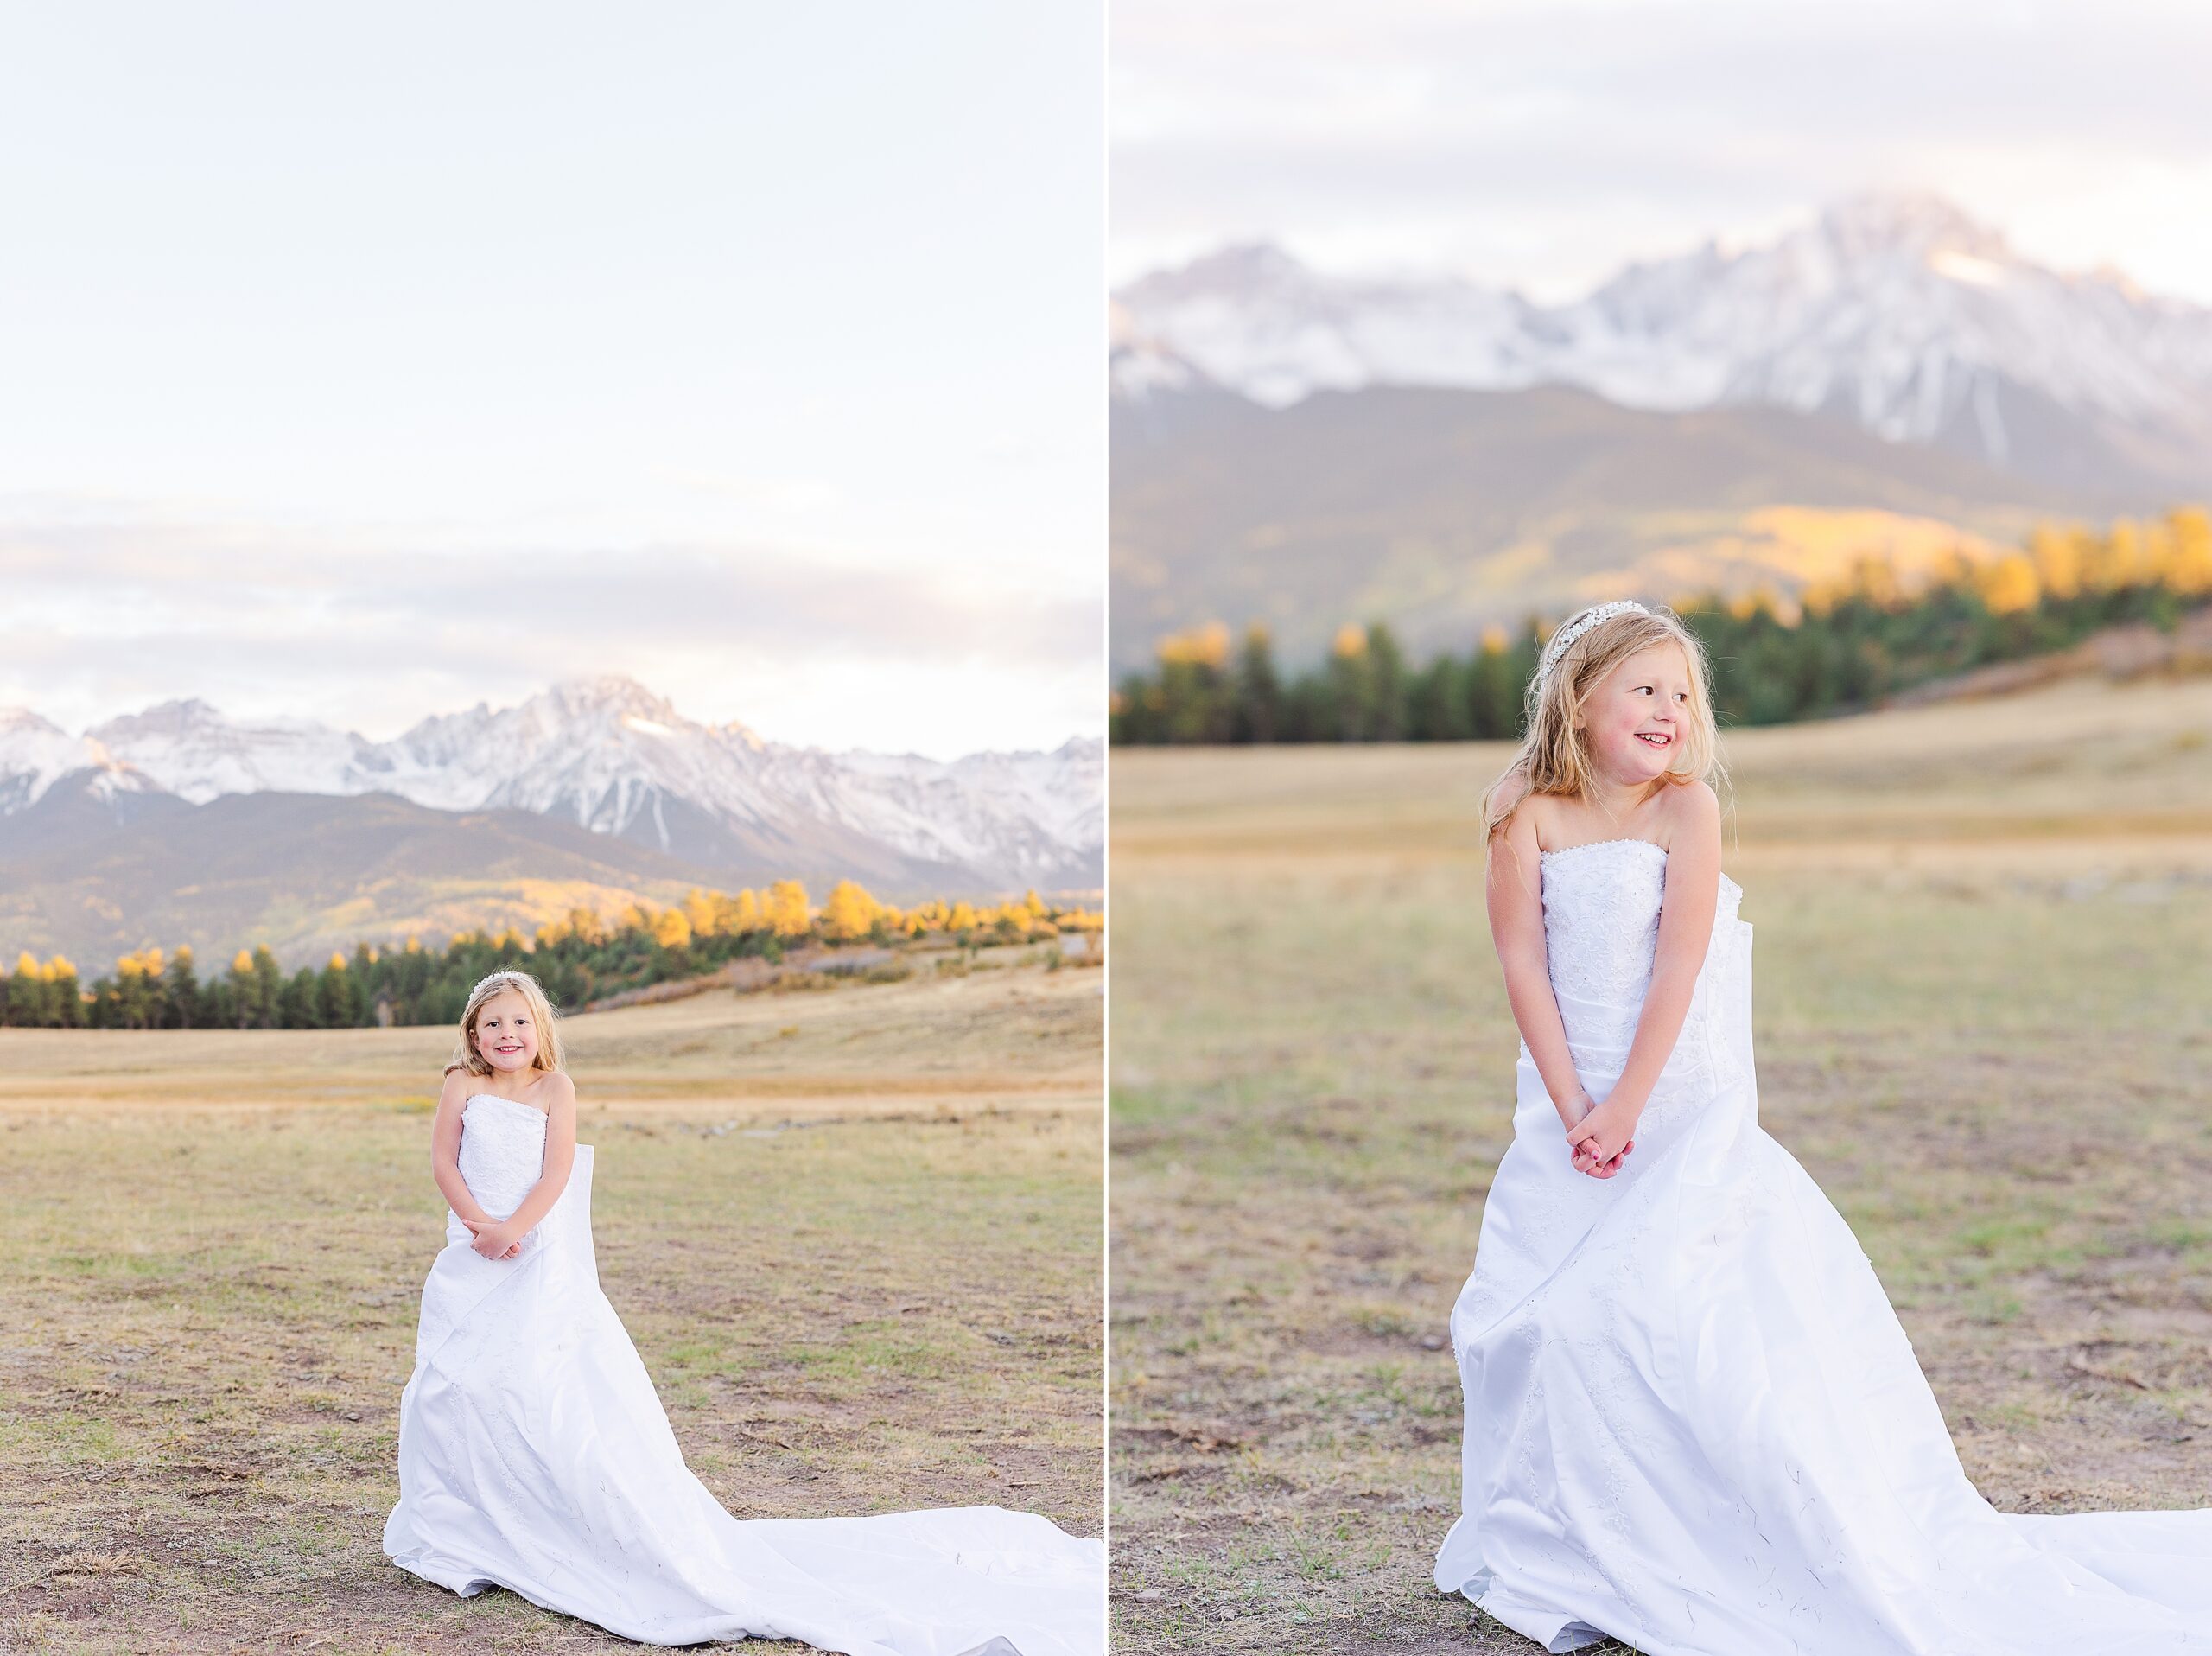 Littles In Wedding Dresses Photo Session